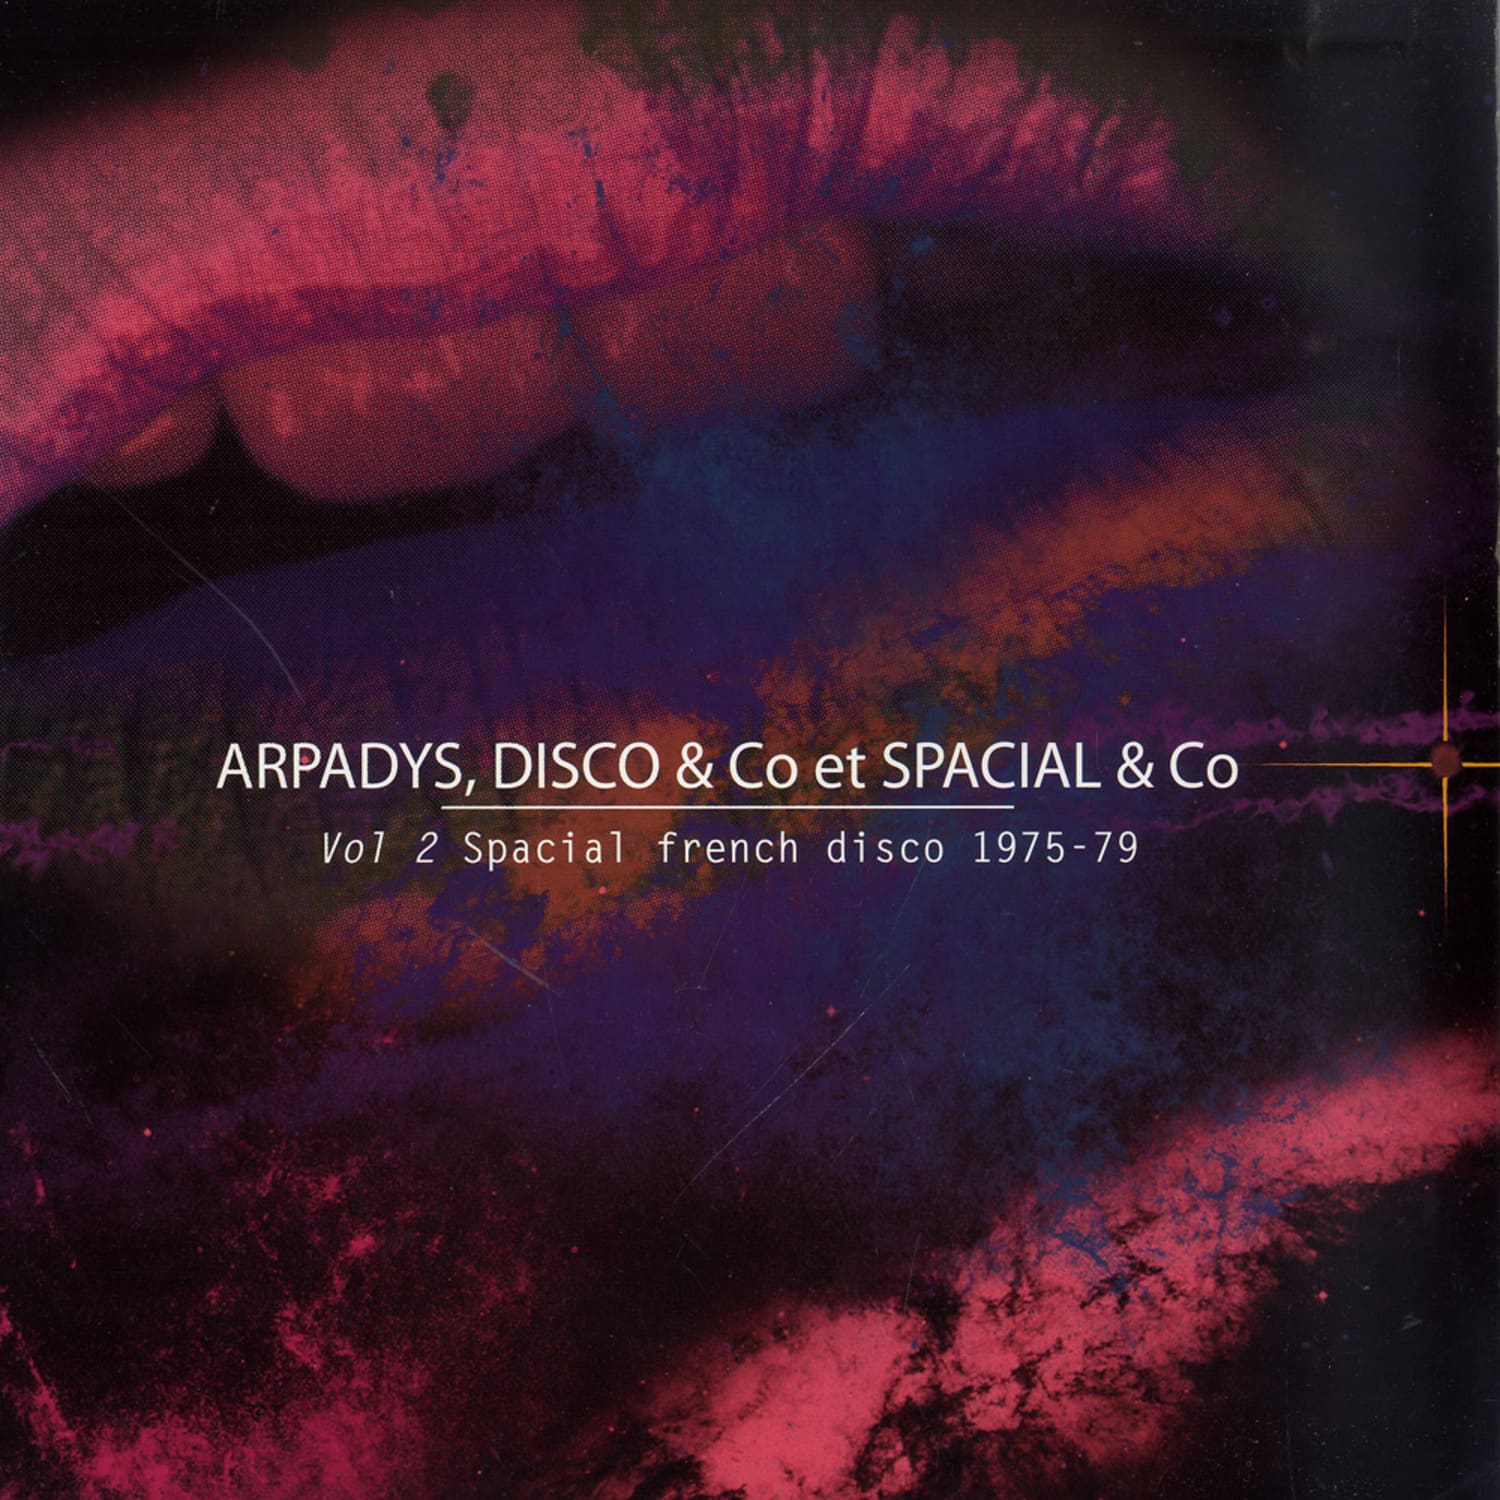 Arpadys, Disco & Co - VOL 2 SPECIAL FRENCH DISCO 1975 - 79